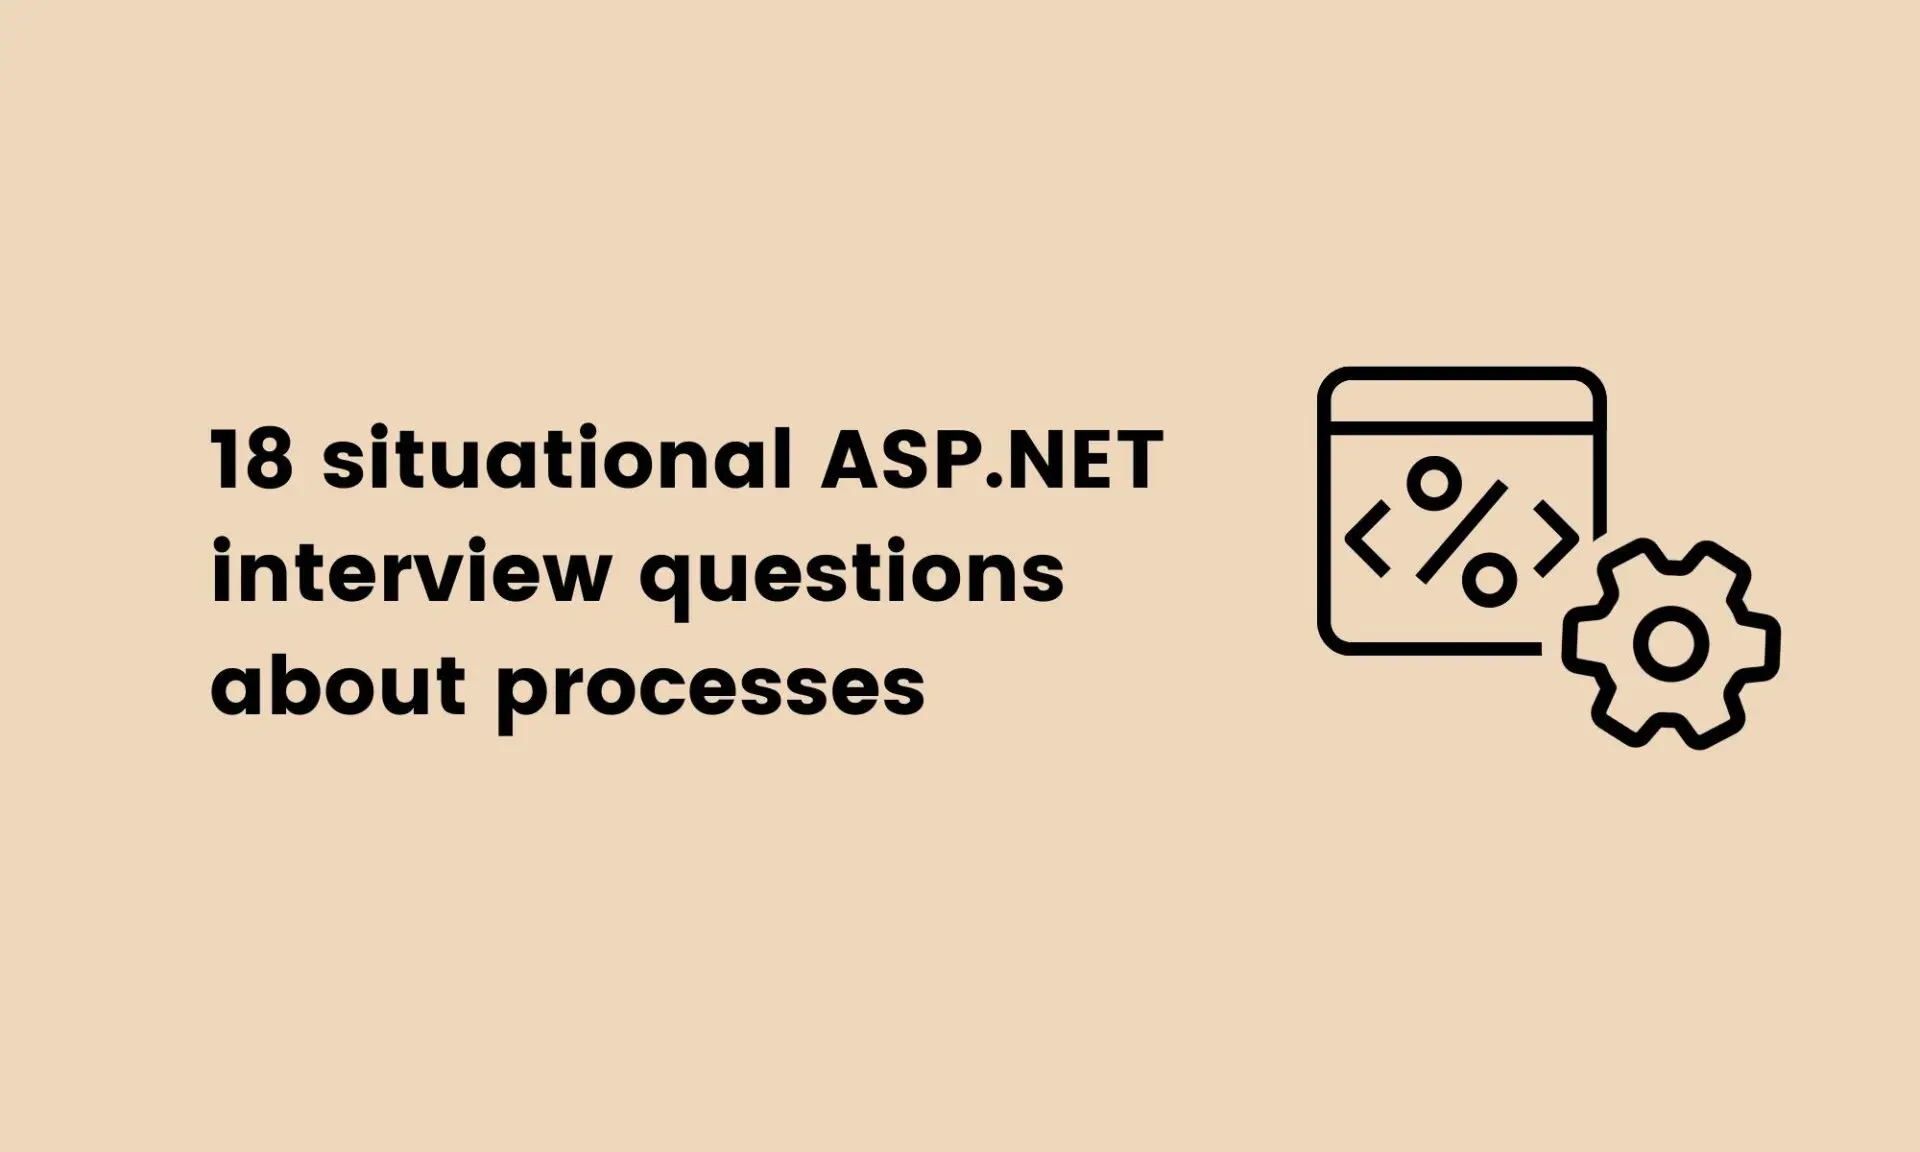 18 situational ASP.NET interview questions about processes